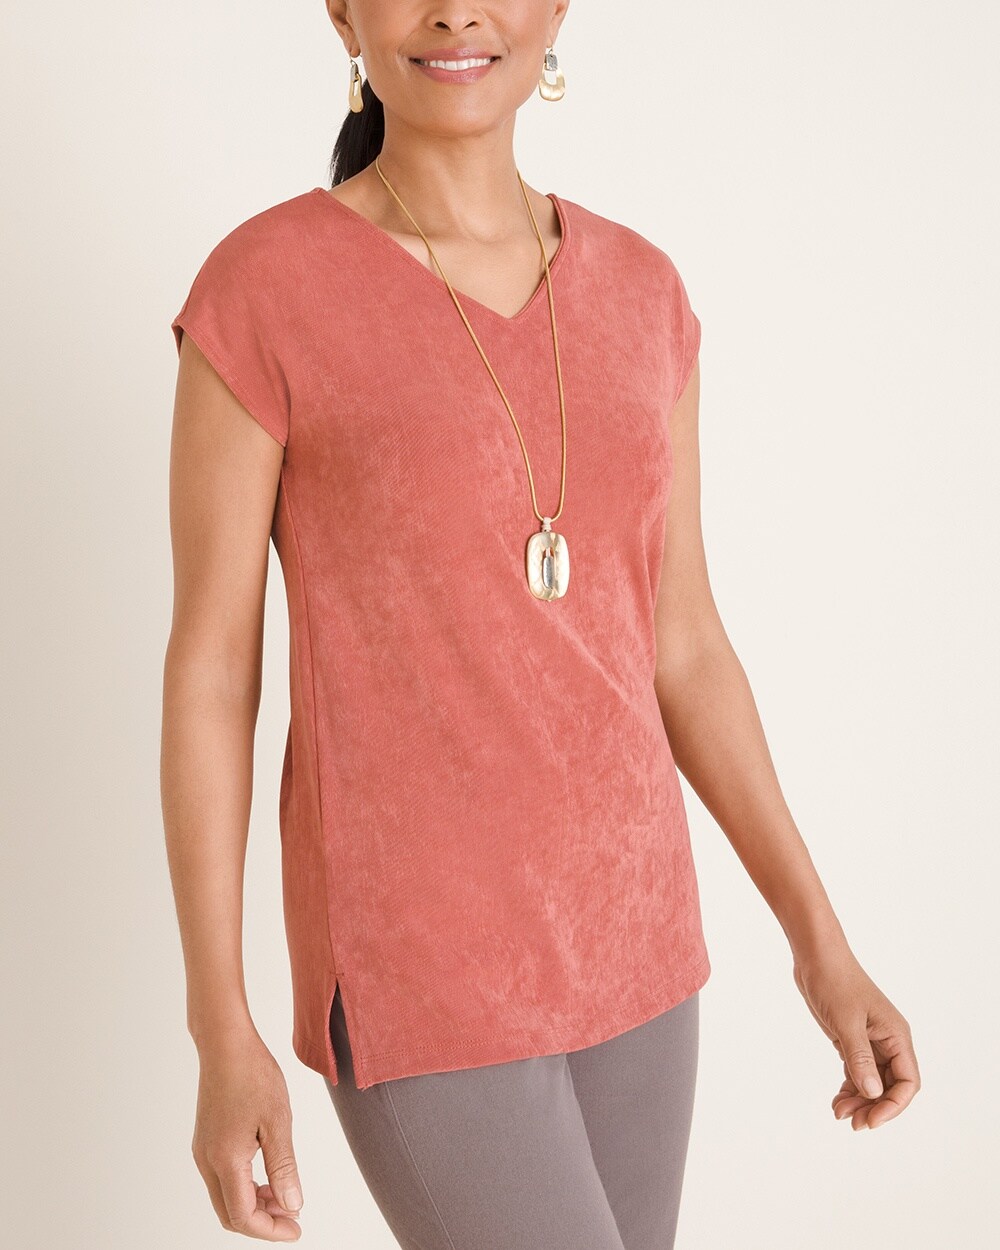 Travelers Classic V-Neck Top